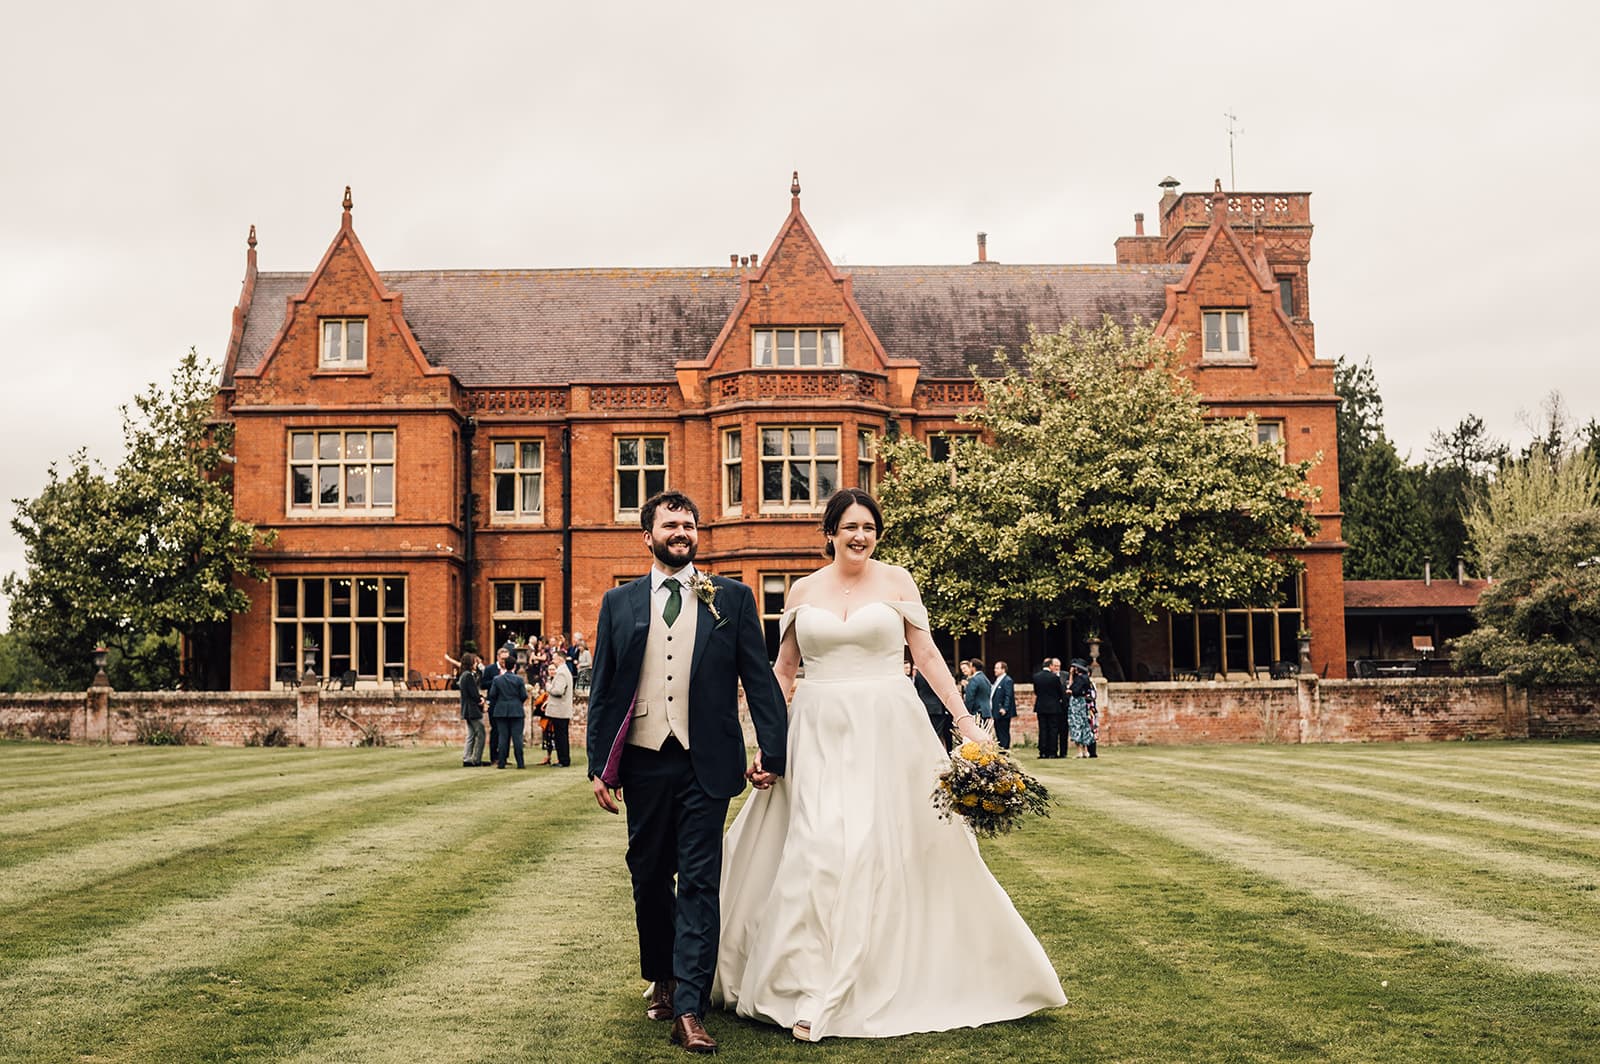 Bride and Groom walk the grounds of Holmewood Hall with the view of the wedding venue building in the background